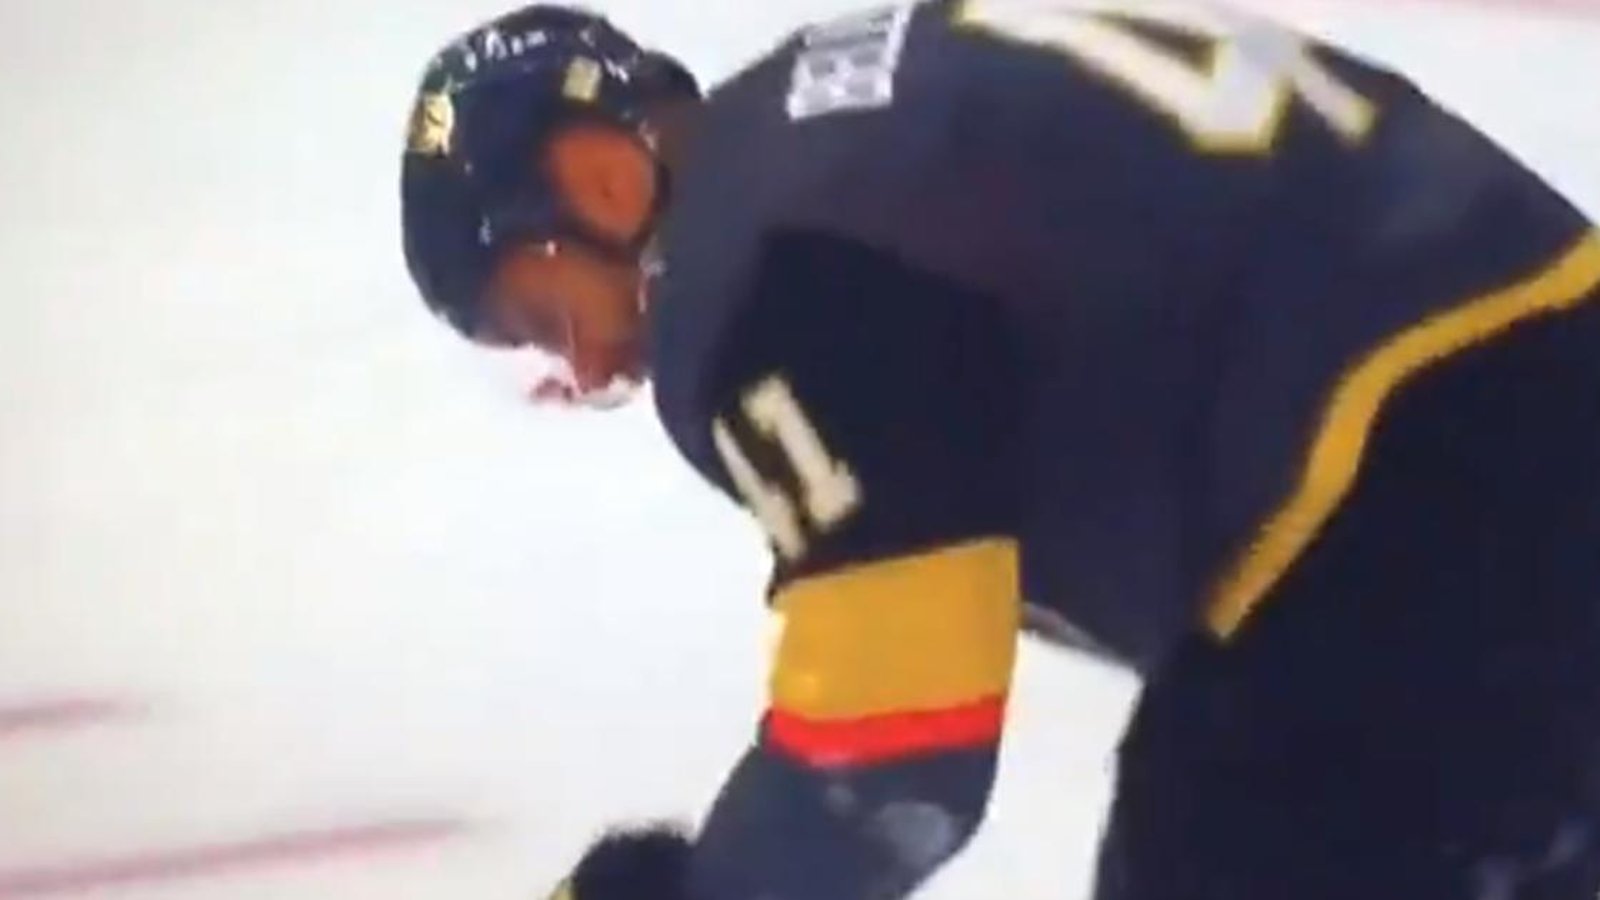 Breaking: Bellemare takes a puck to the face, leaves the ice a bloody mess